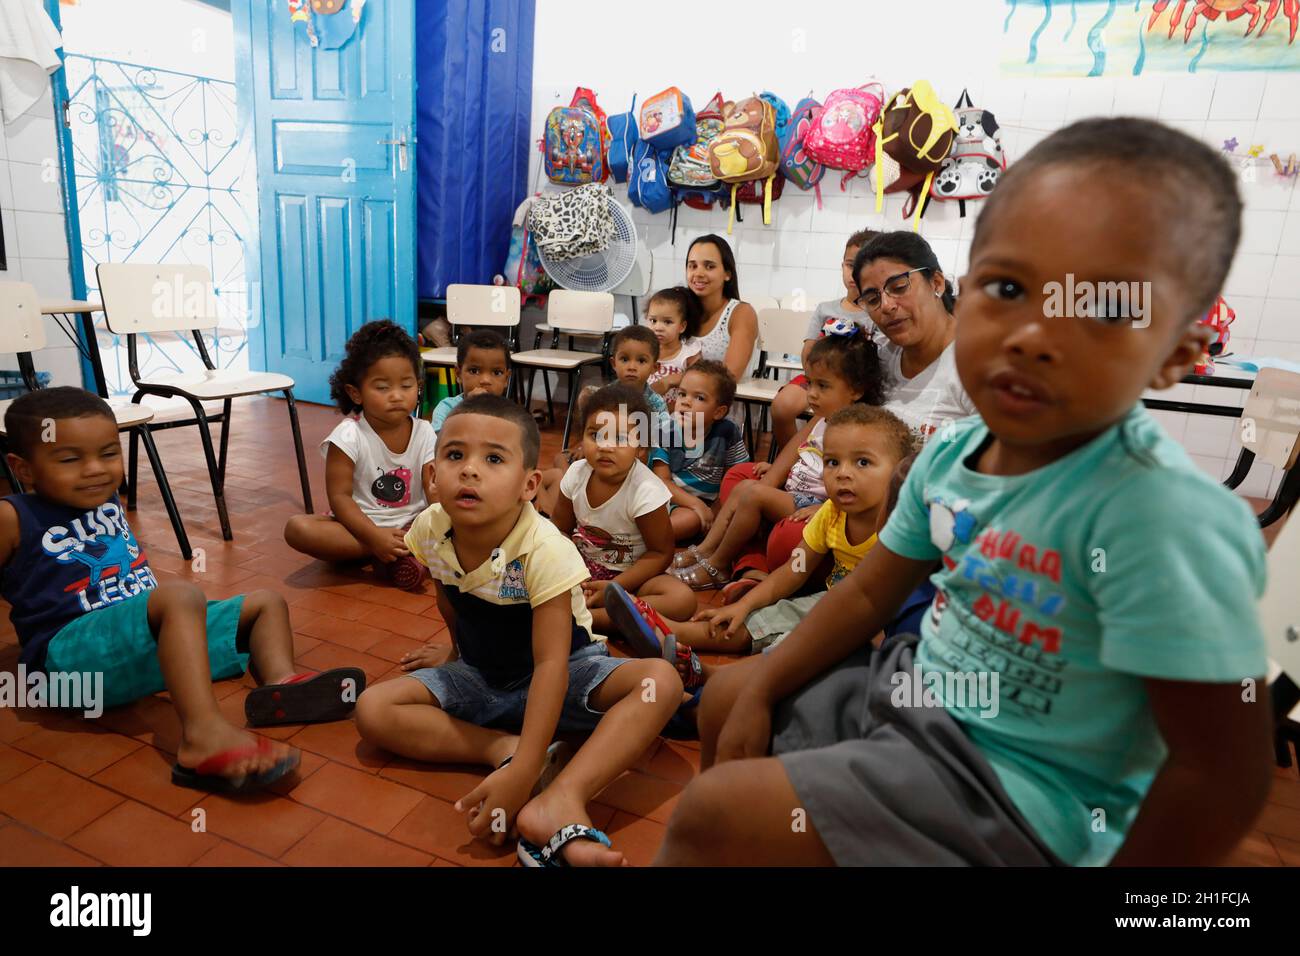 alagoinhas, bahia / brazil - july 3, 2019: Students are seen at Creche Escola Municipal Rosario Caridadel, in the city of Alagoinhas.          *** Loc Stock Photo